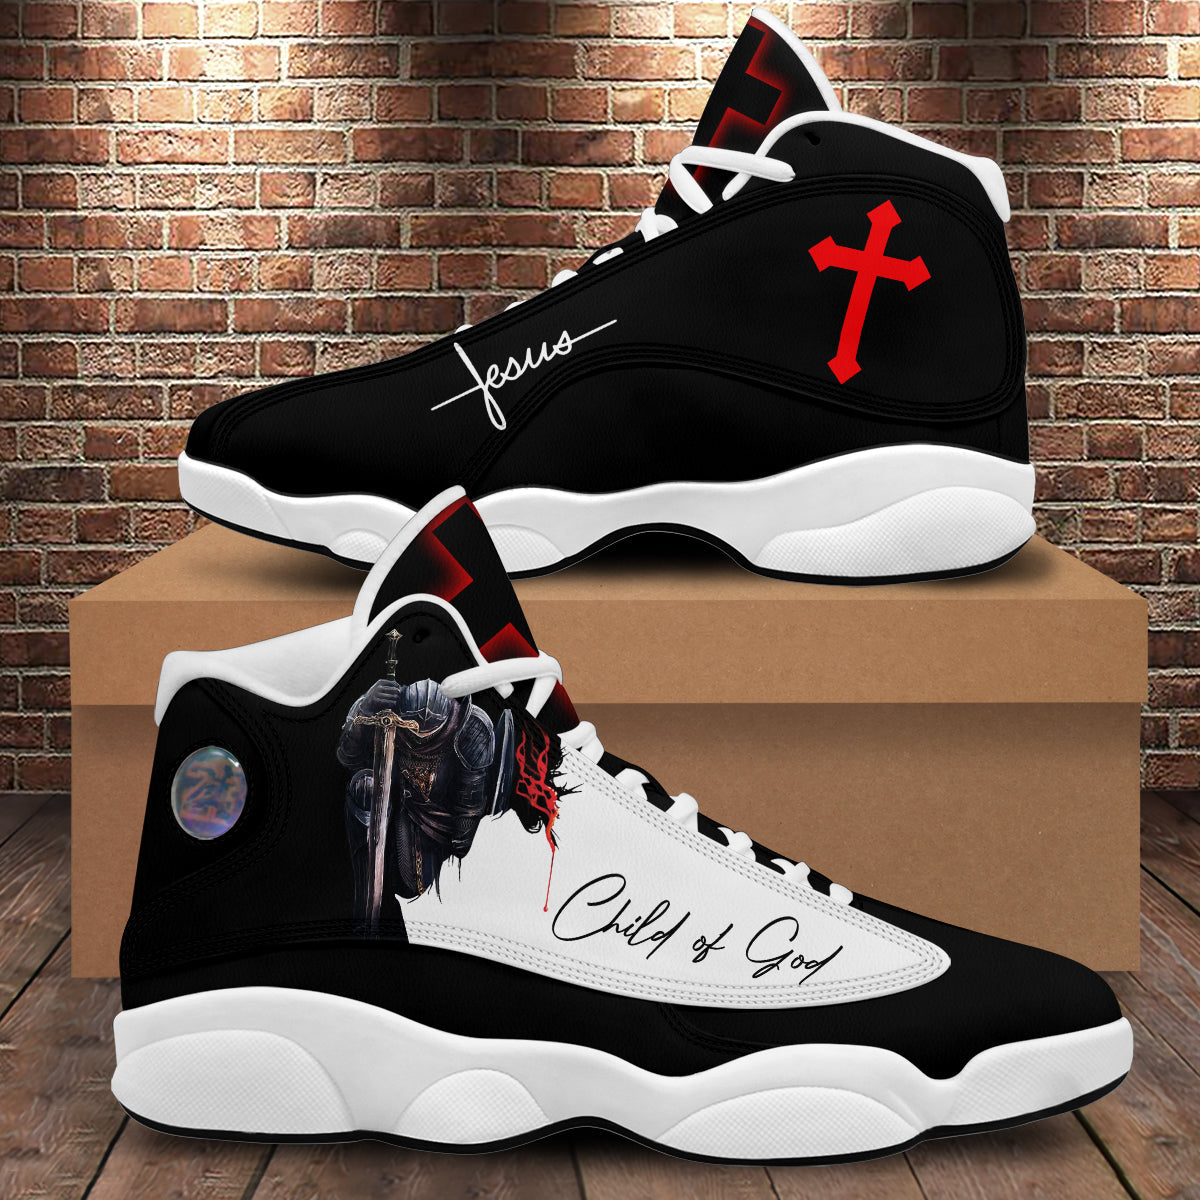 A Child Of God Jesus Basketball Shoes For Men Women - Christian Shoes - Jesus Shoes - Unisex Basketball Shoes